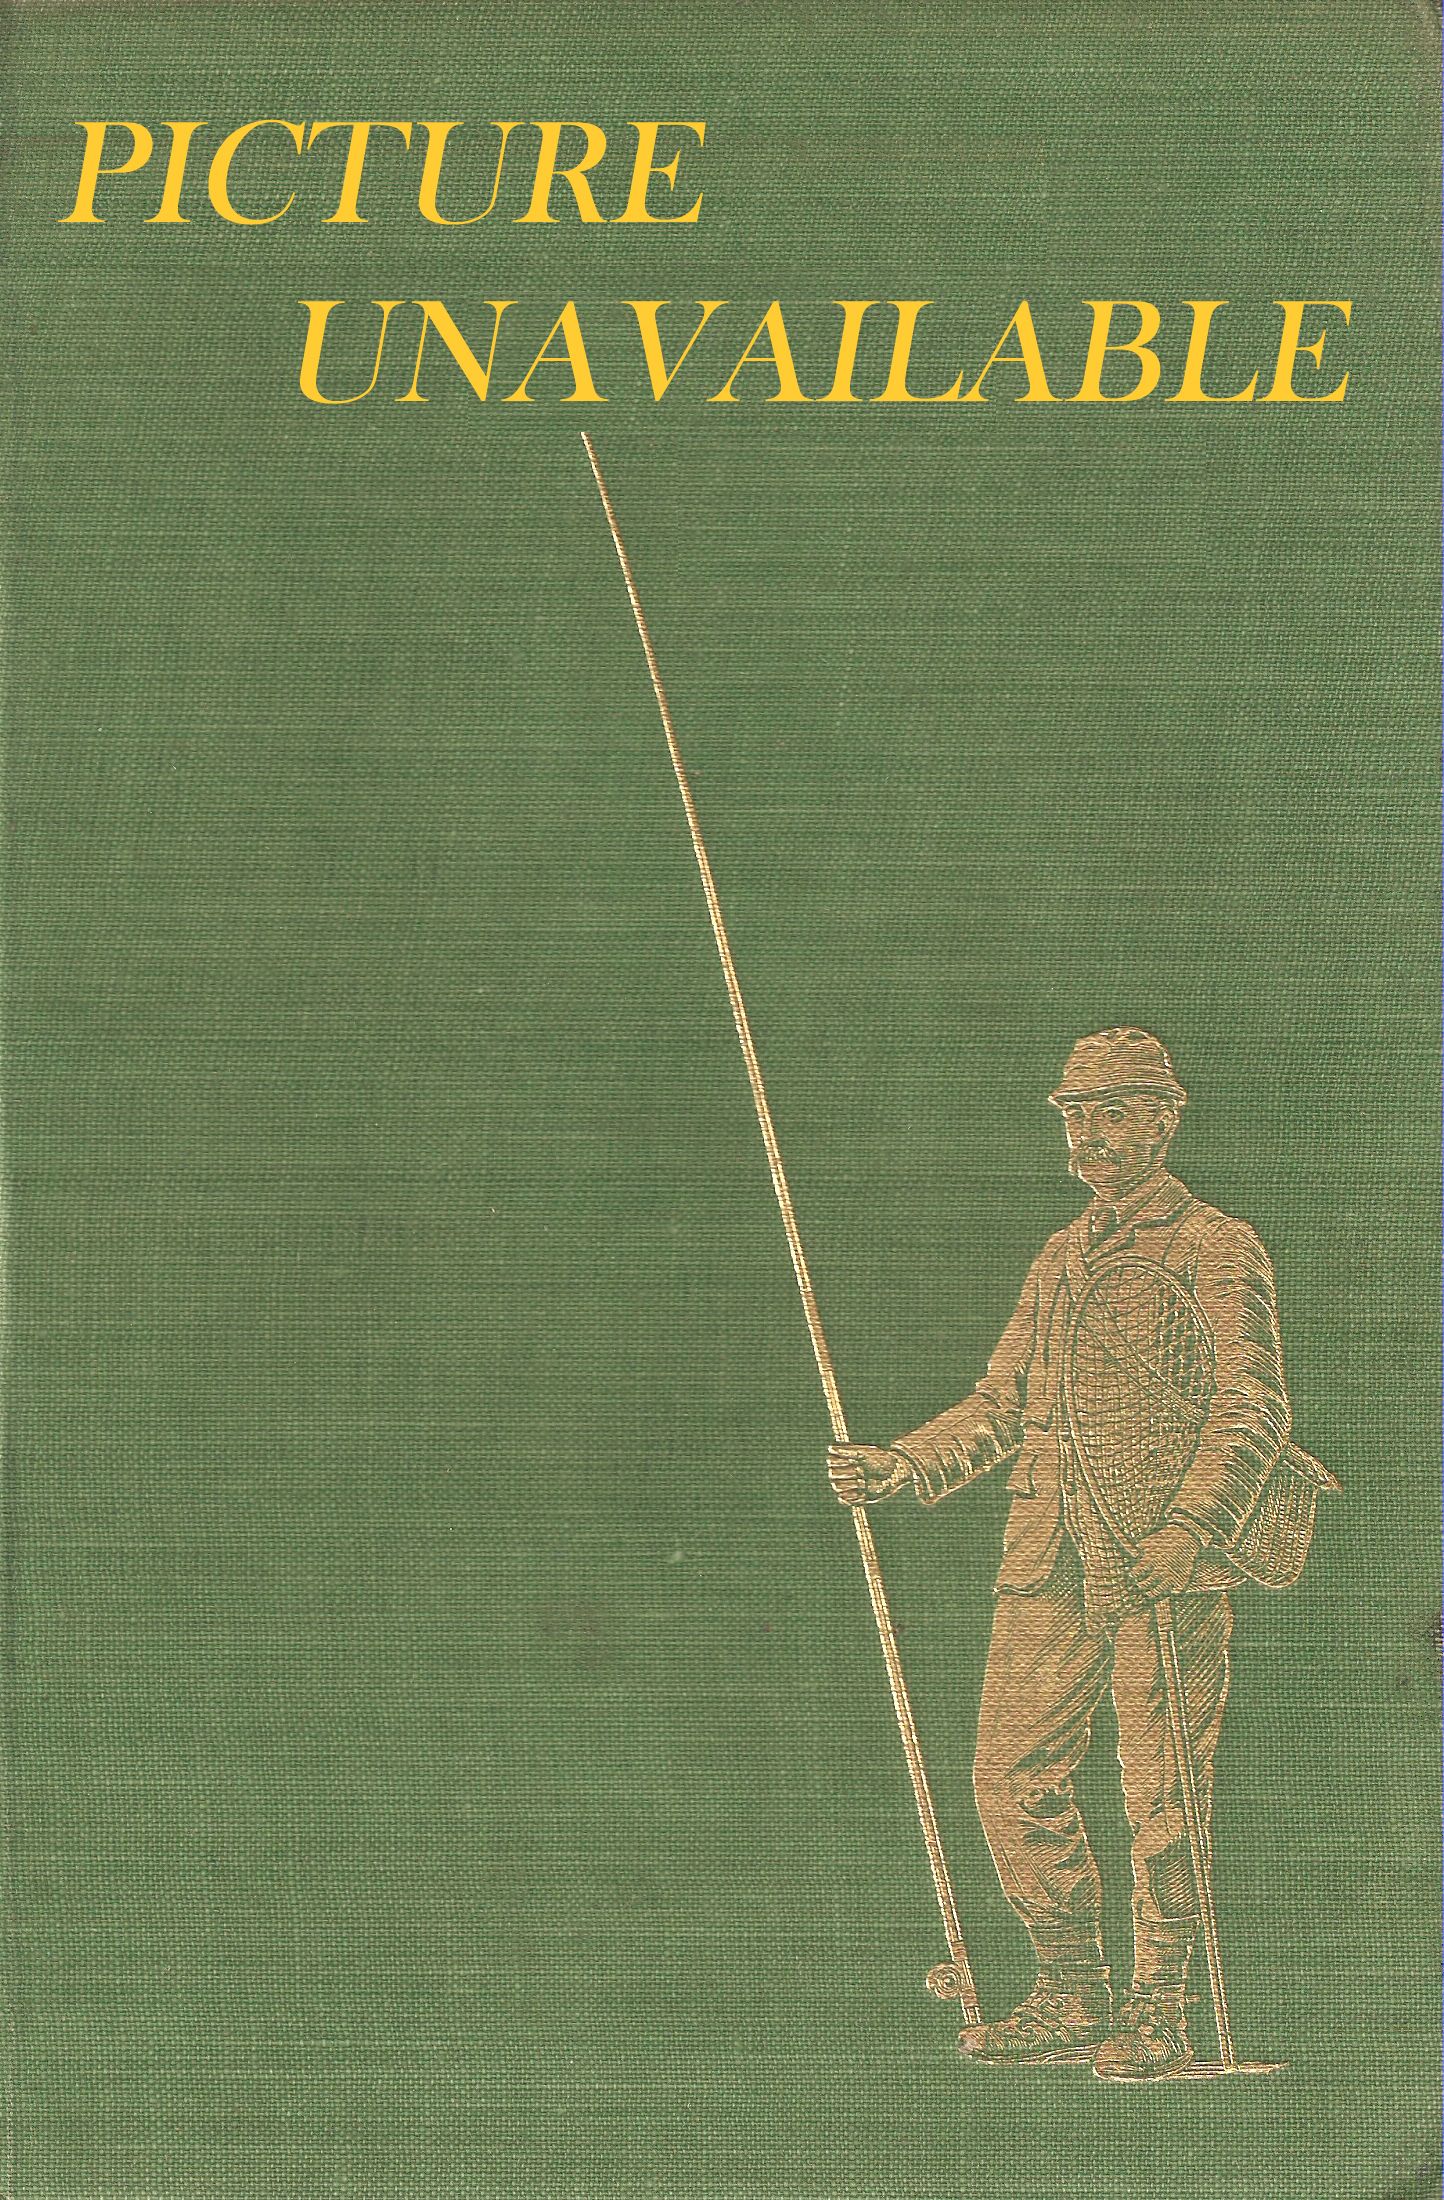 BARBEL RIVERS AND CAPTURES. Compiled by the Barbel Catchers. Edited by Bob  Singleton and Mick Wood. First edition.